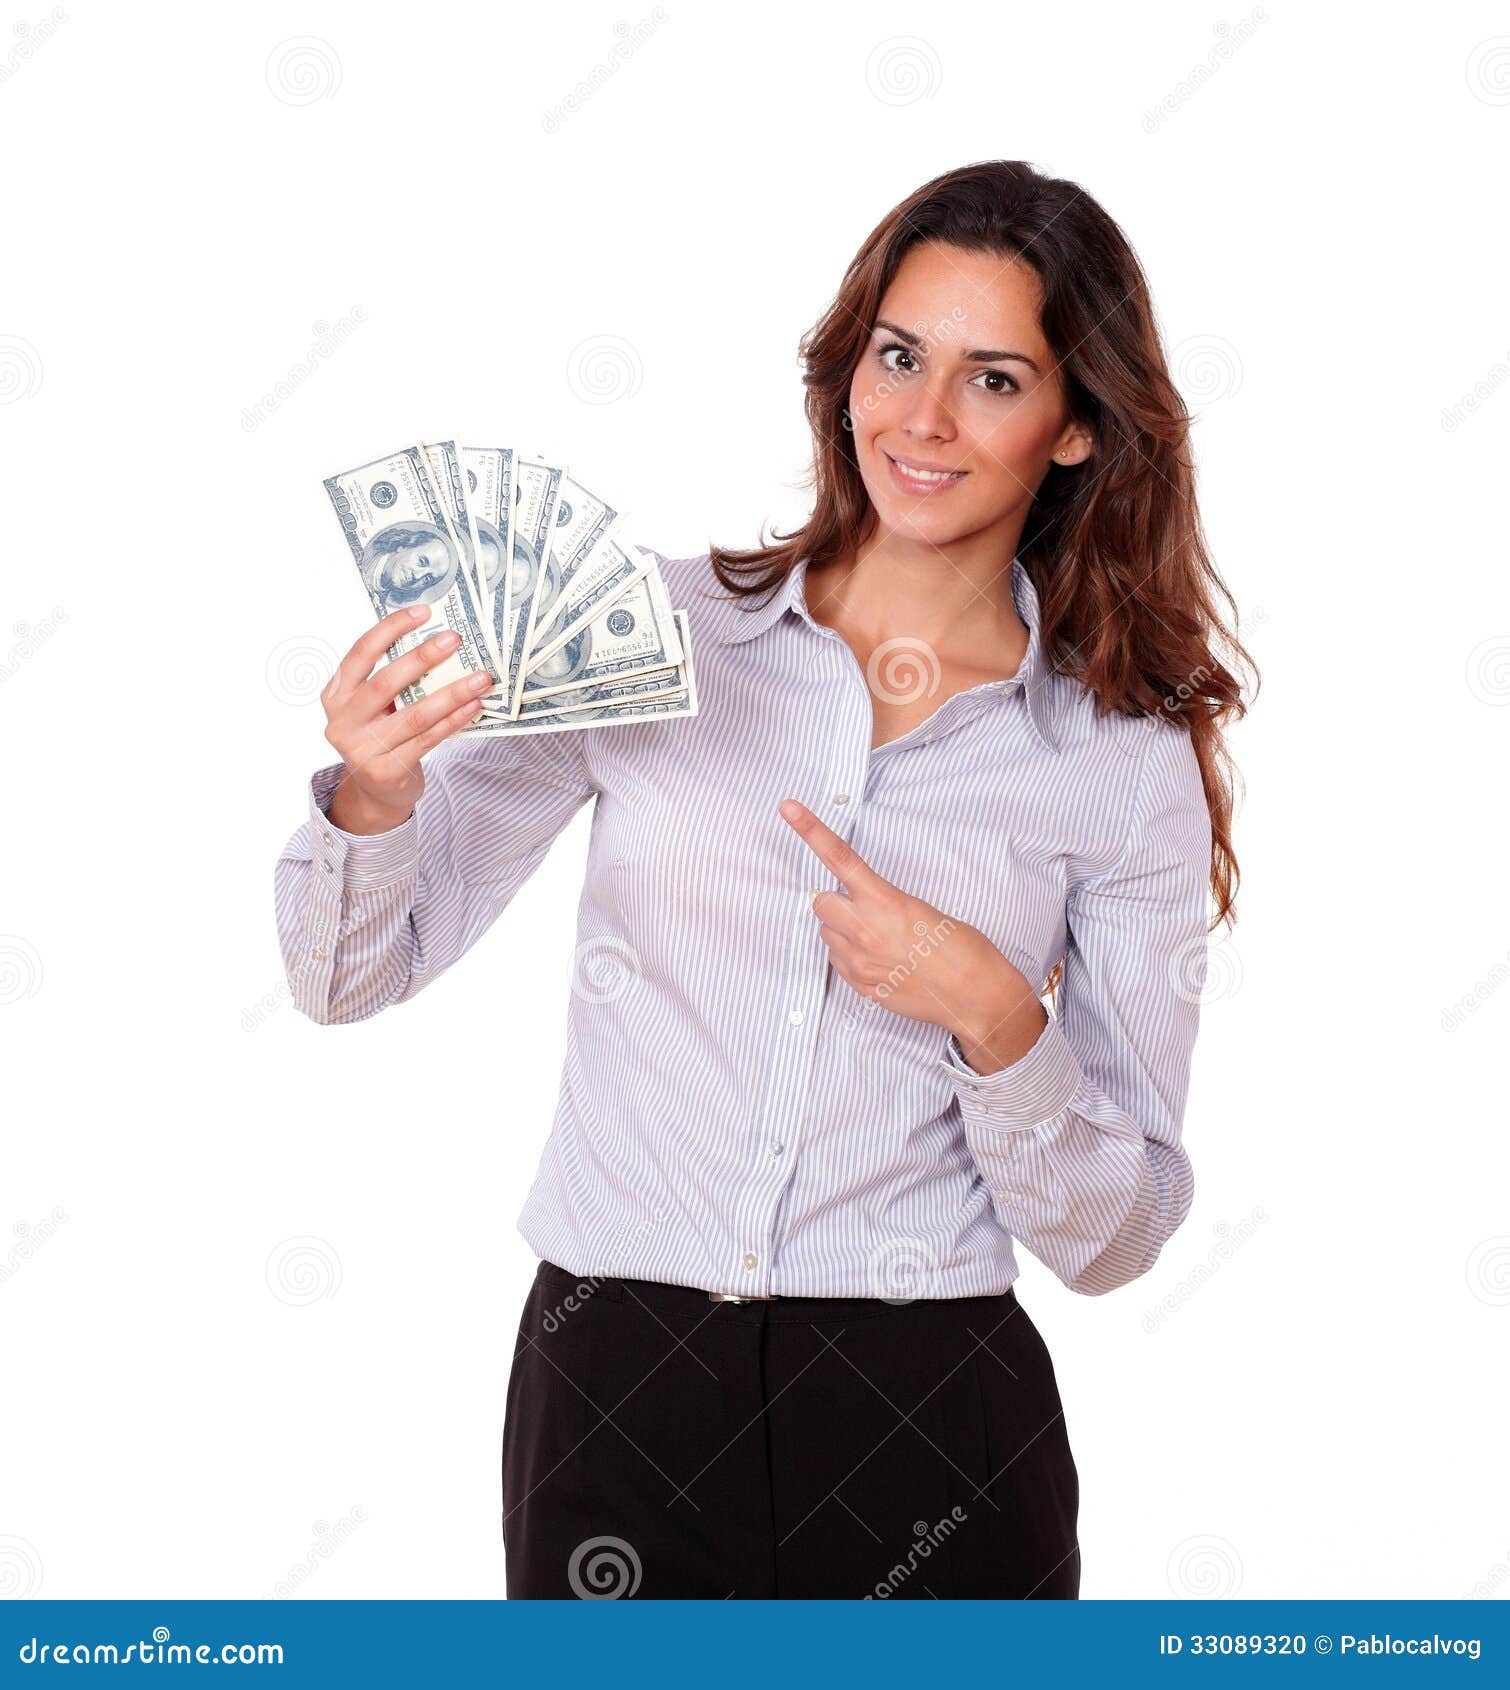  - lovely-young-woman-holding-cash-dollars-portrait-isolated-background-33089320